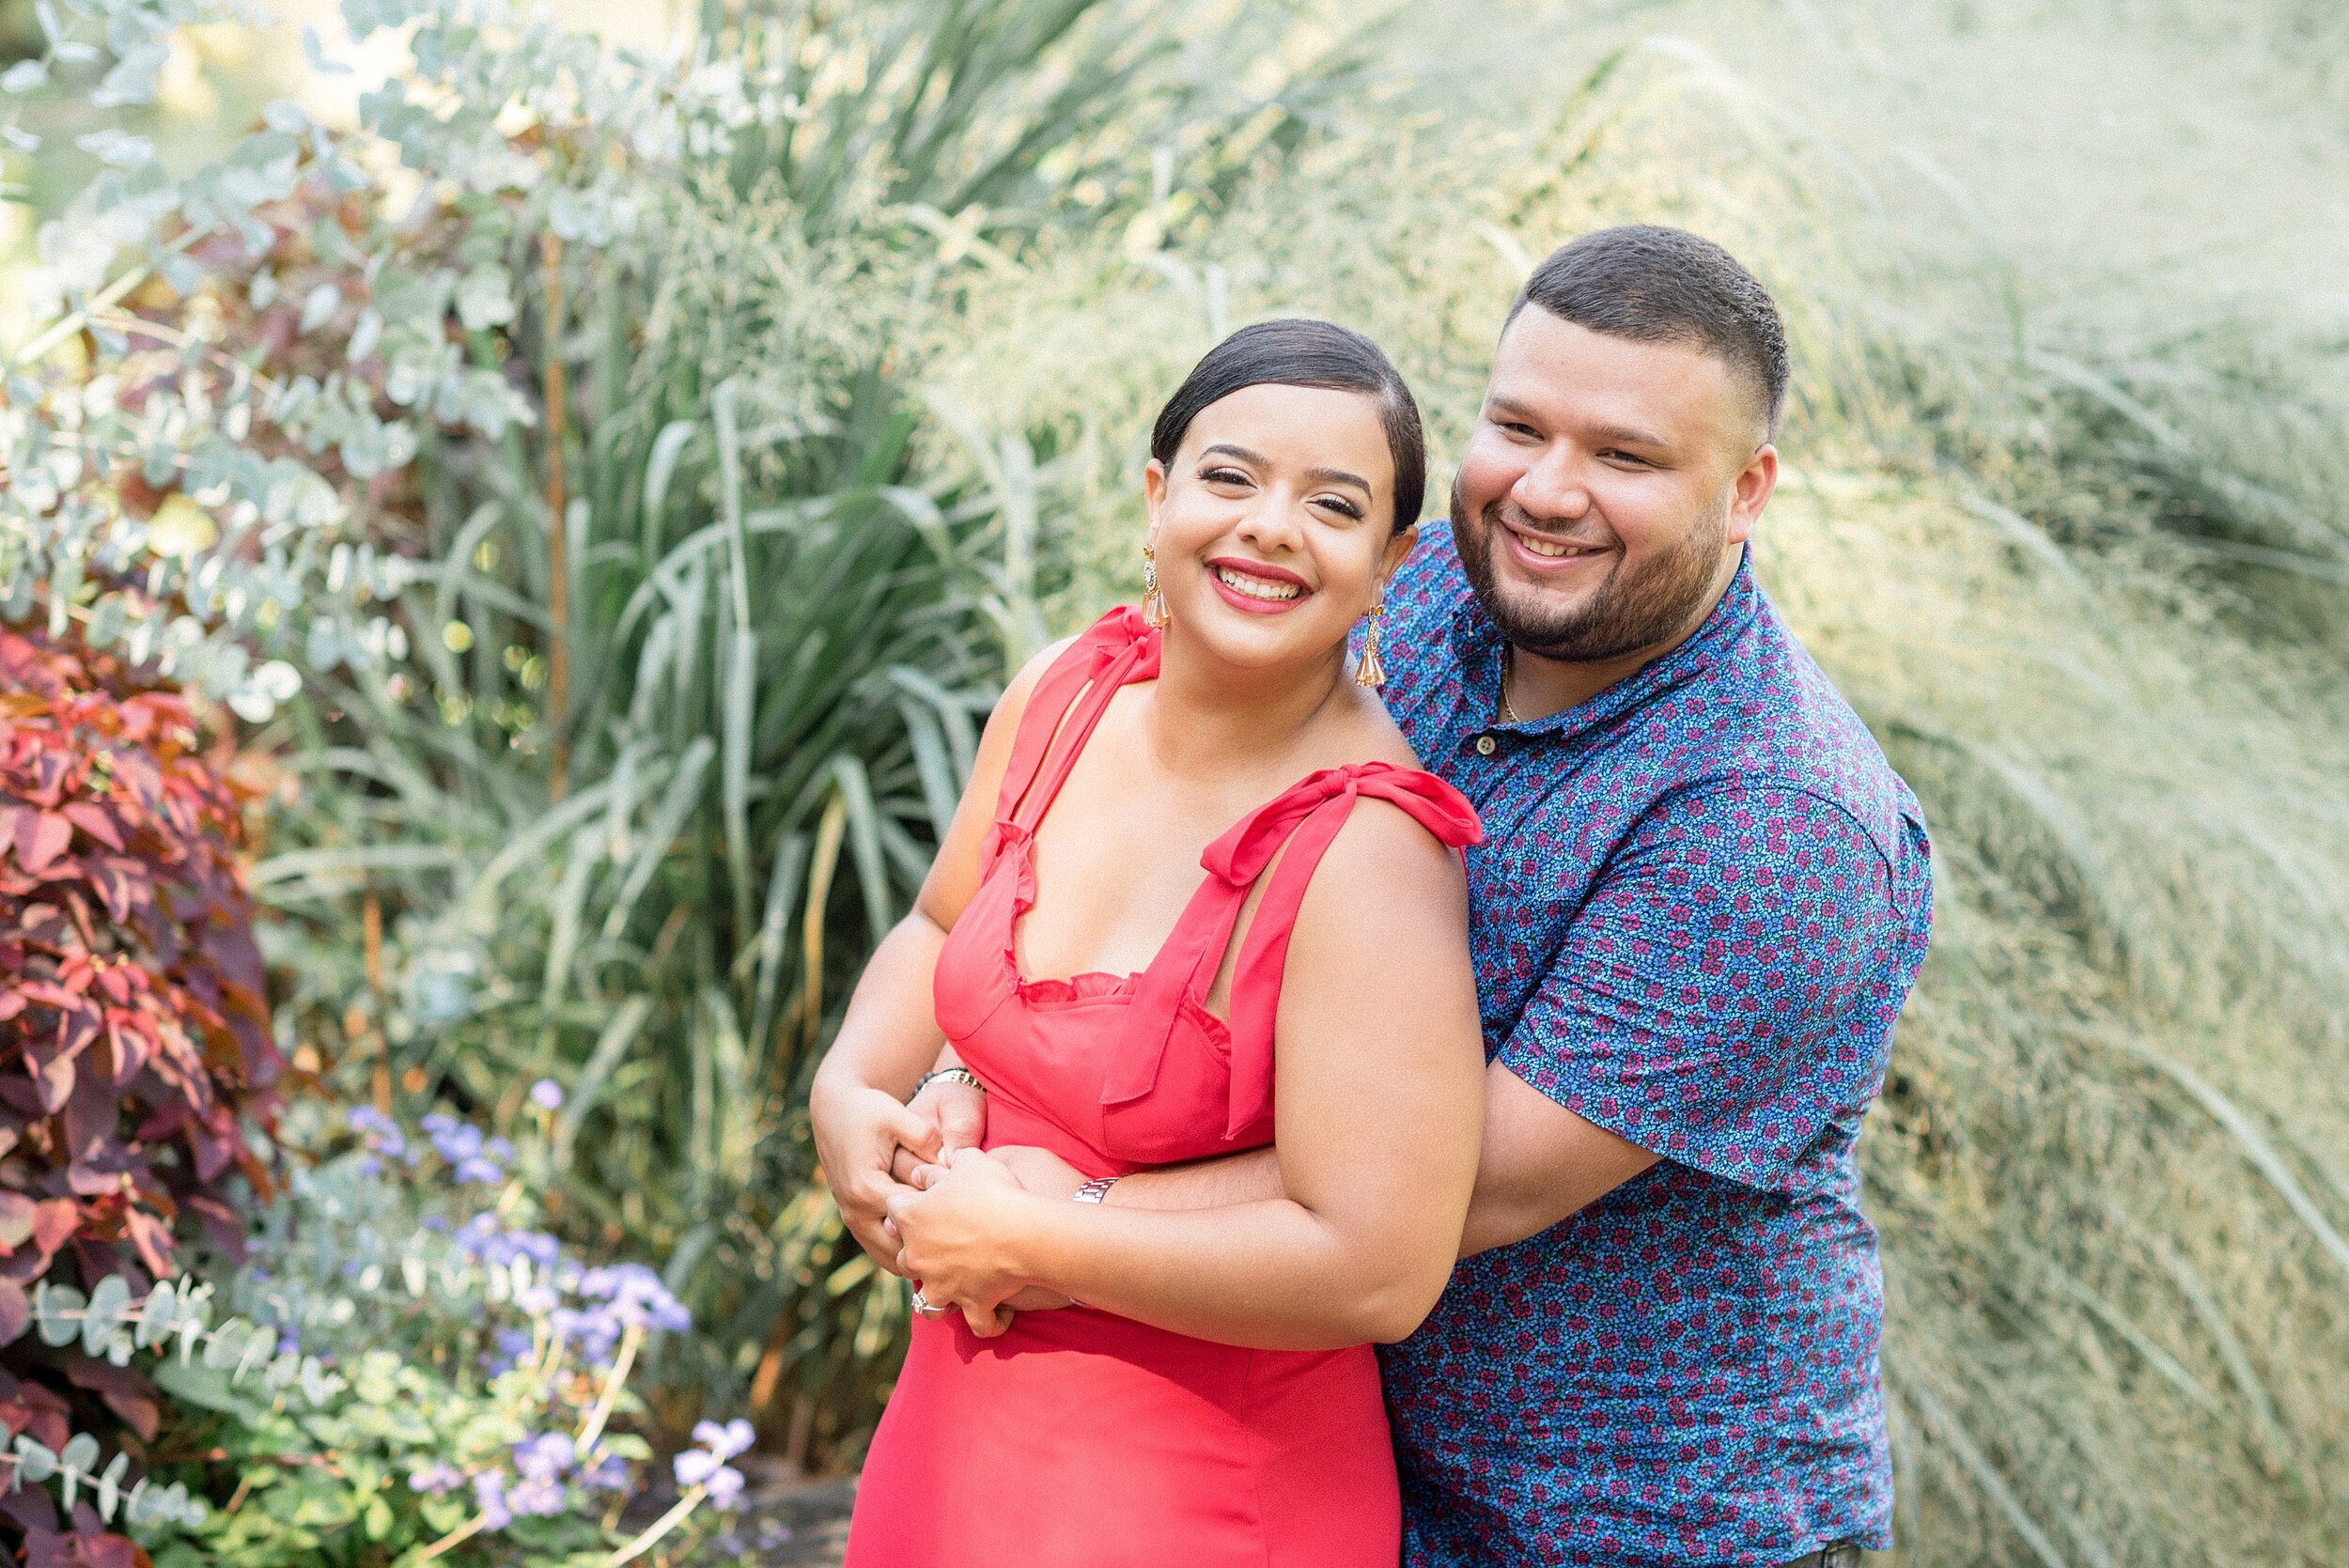 Longwood Gardens Kennet Square Pa Summer Engagement Session Photography_7685.jpg